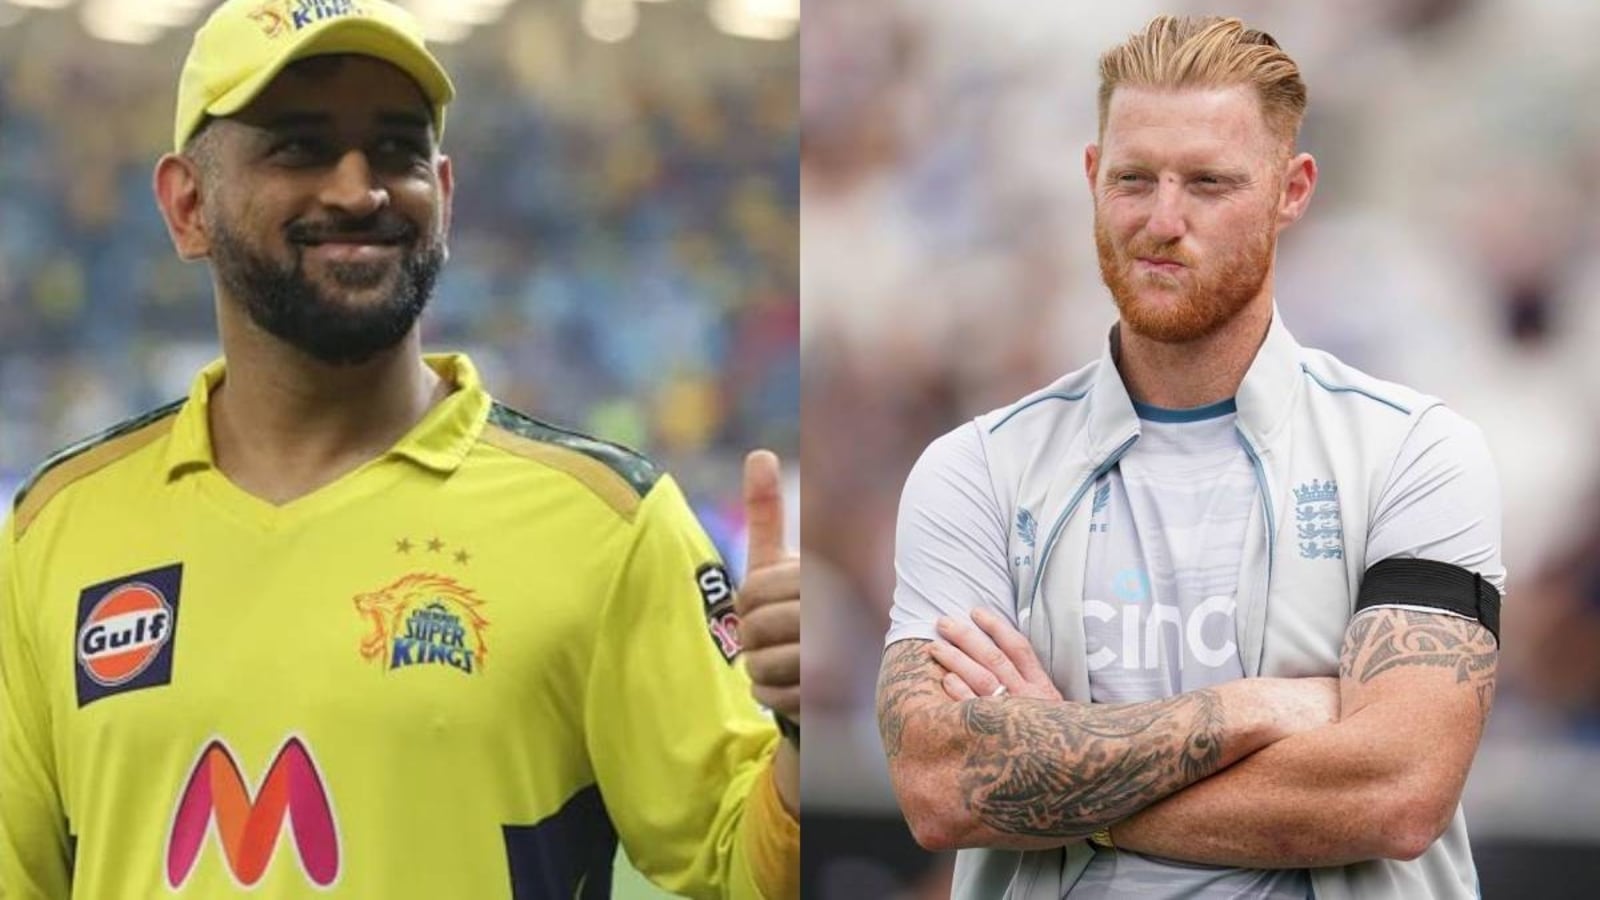 Dhoni master stroke': Fans believe CSK 'got their next captain' in Stokes |  Cricket - Hindustan Times